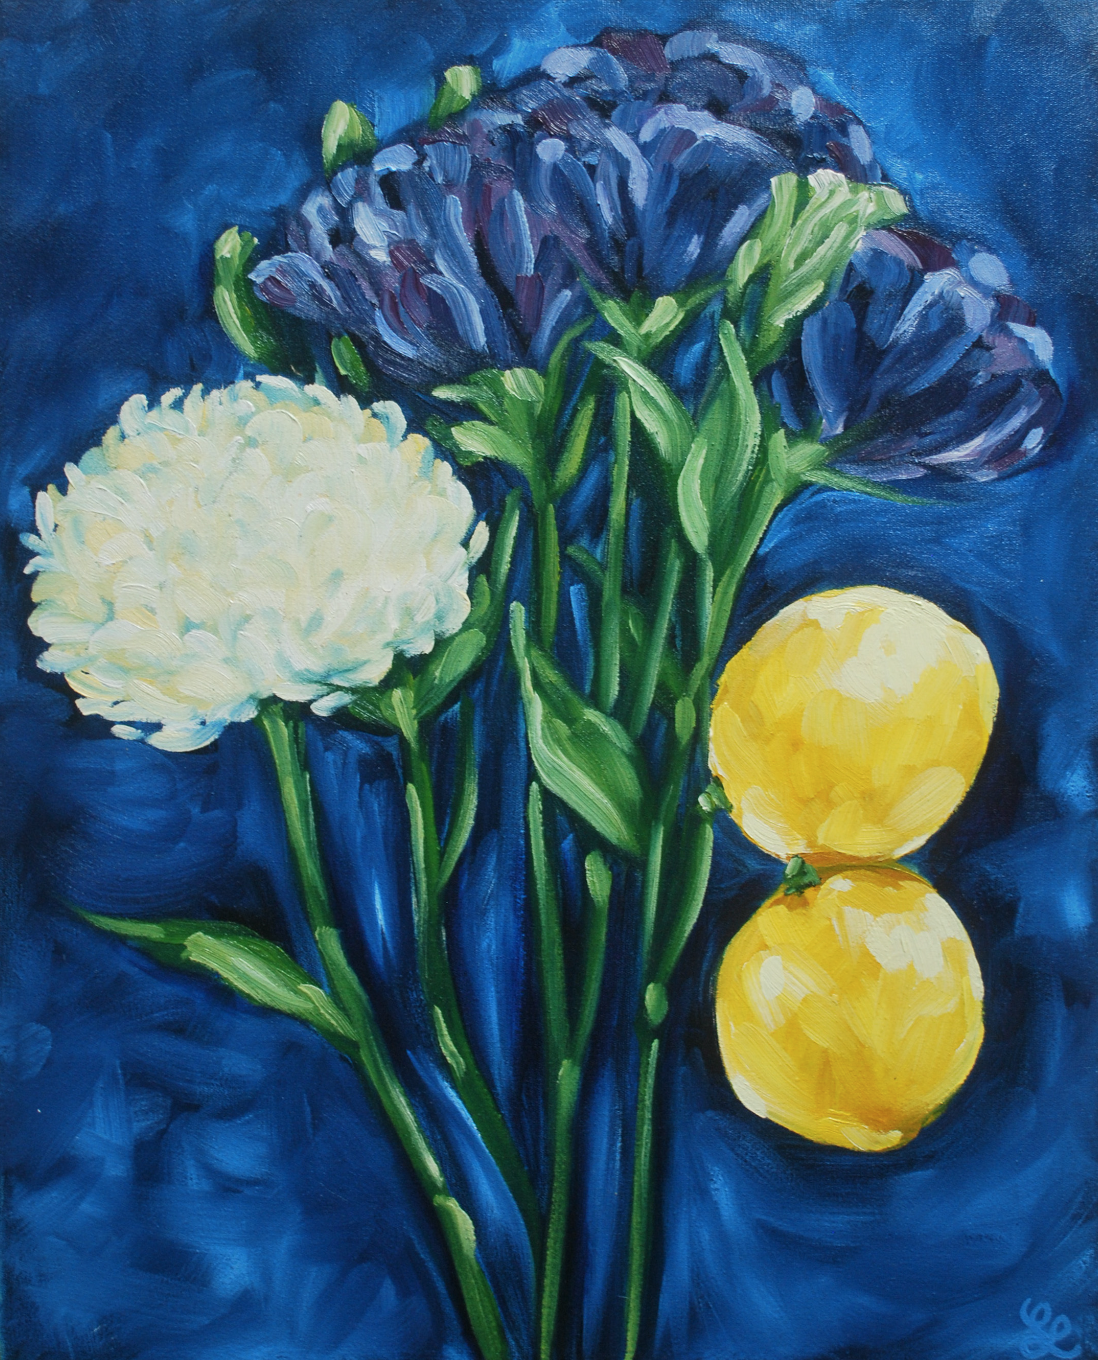 Lemons and Flowers- Still life oil painting on stretched canvas by Erika Lancaster